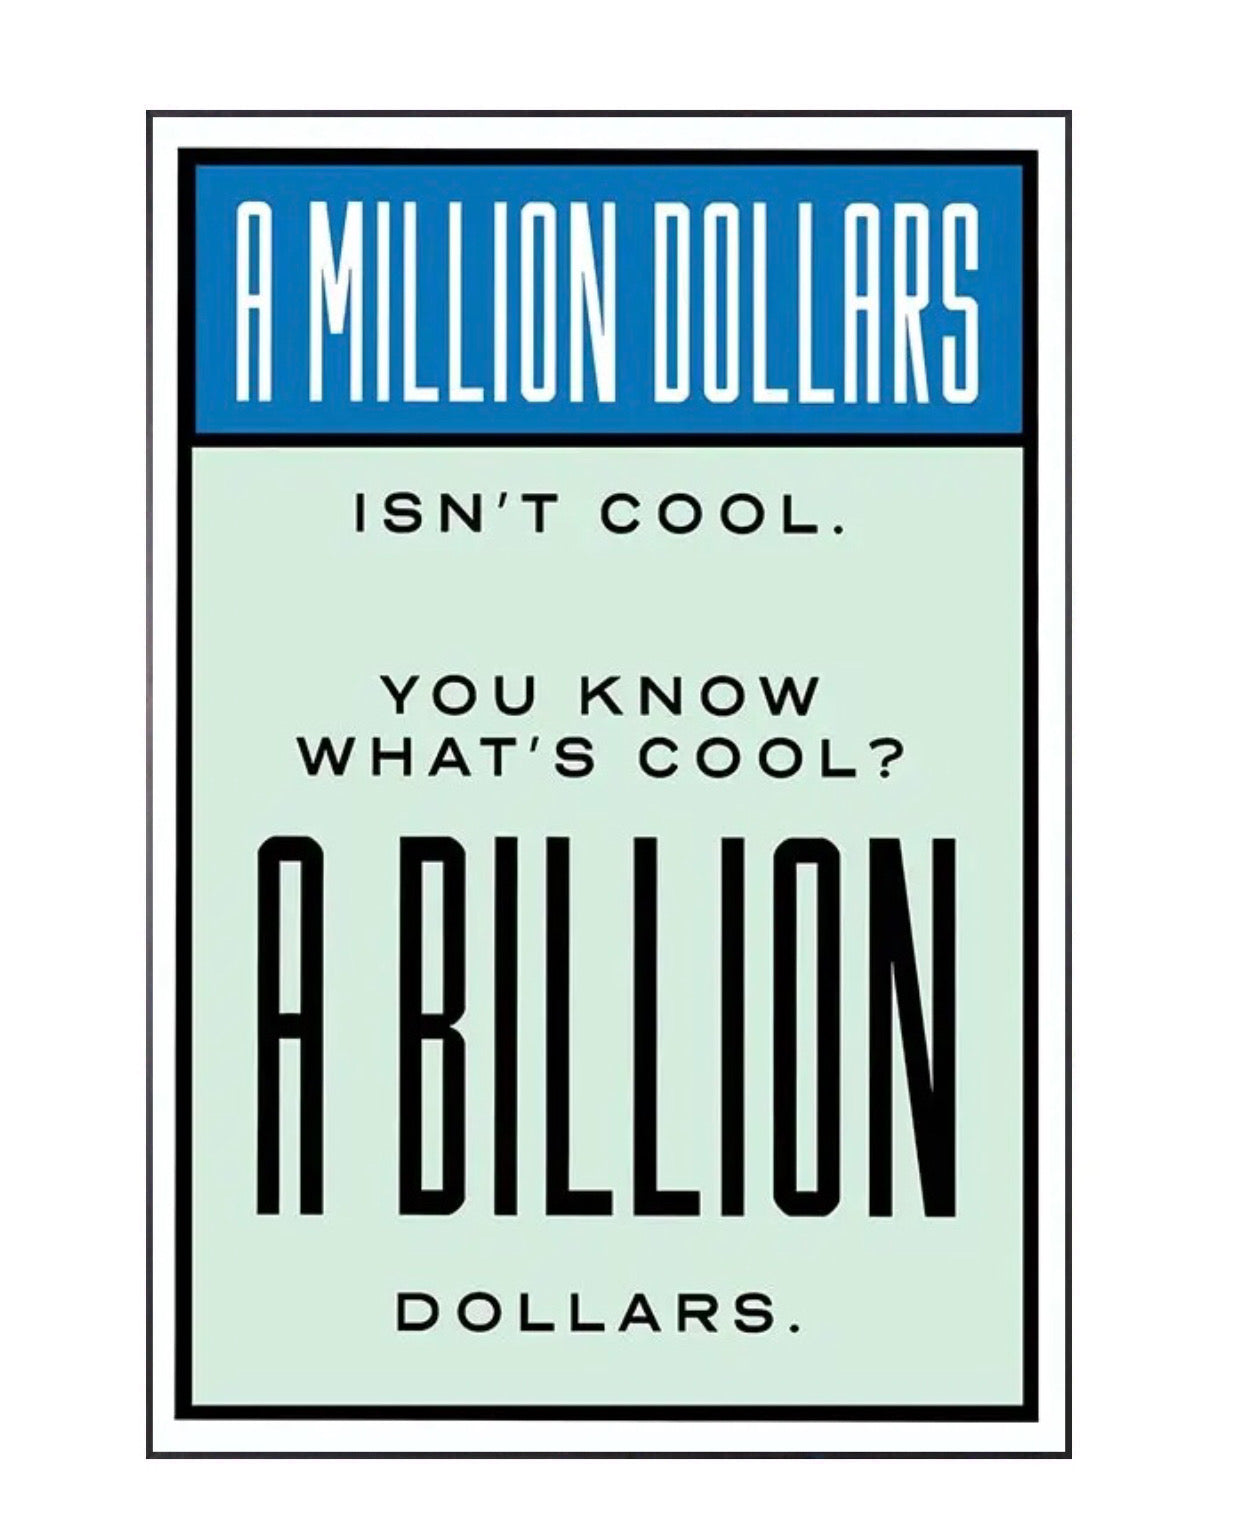 "a million dollars isn't cool. you know what's cool? a BILLION dollars." money poster